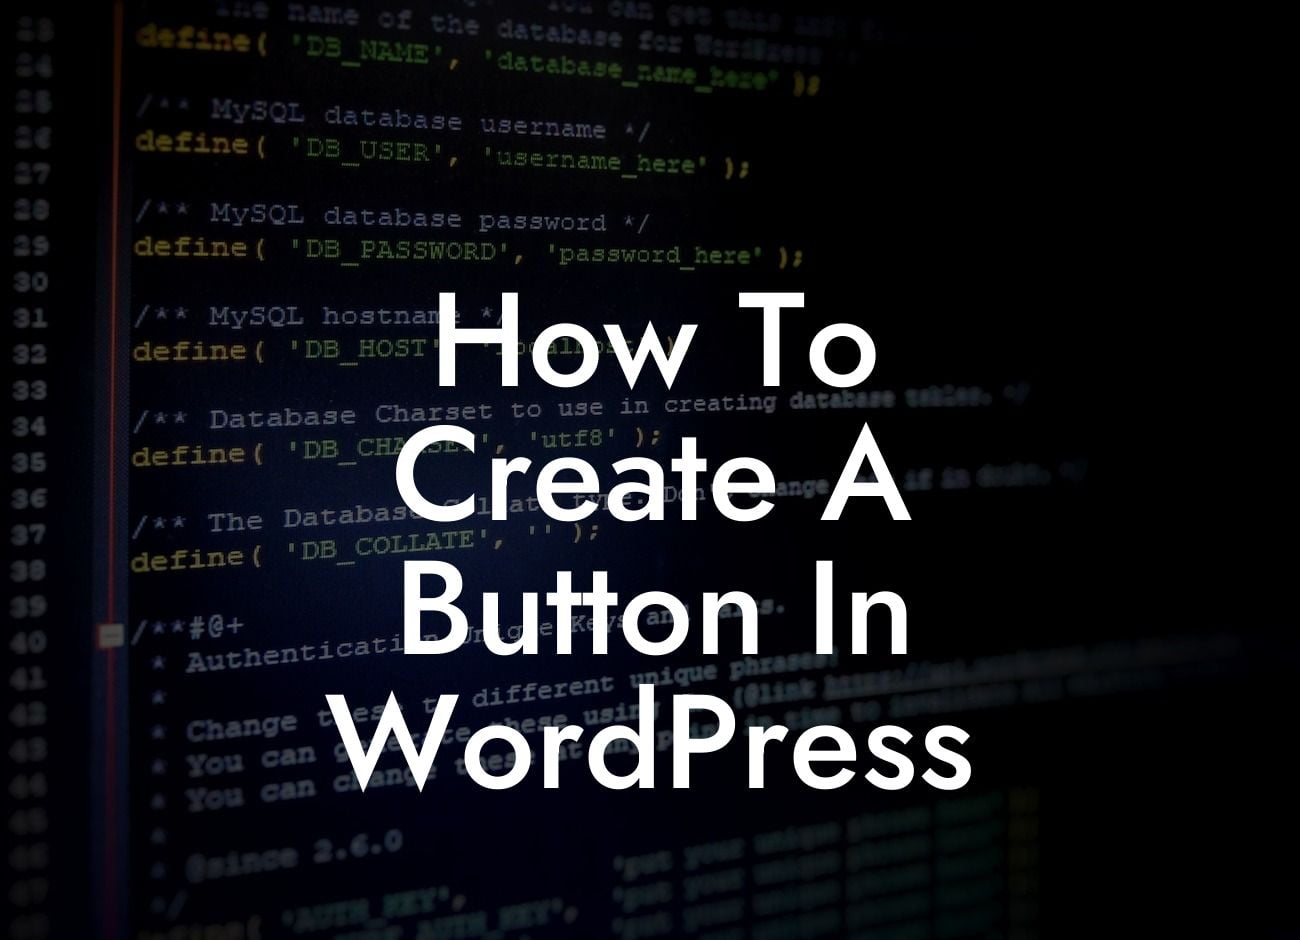 How To Create A Button In WordPress